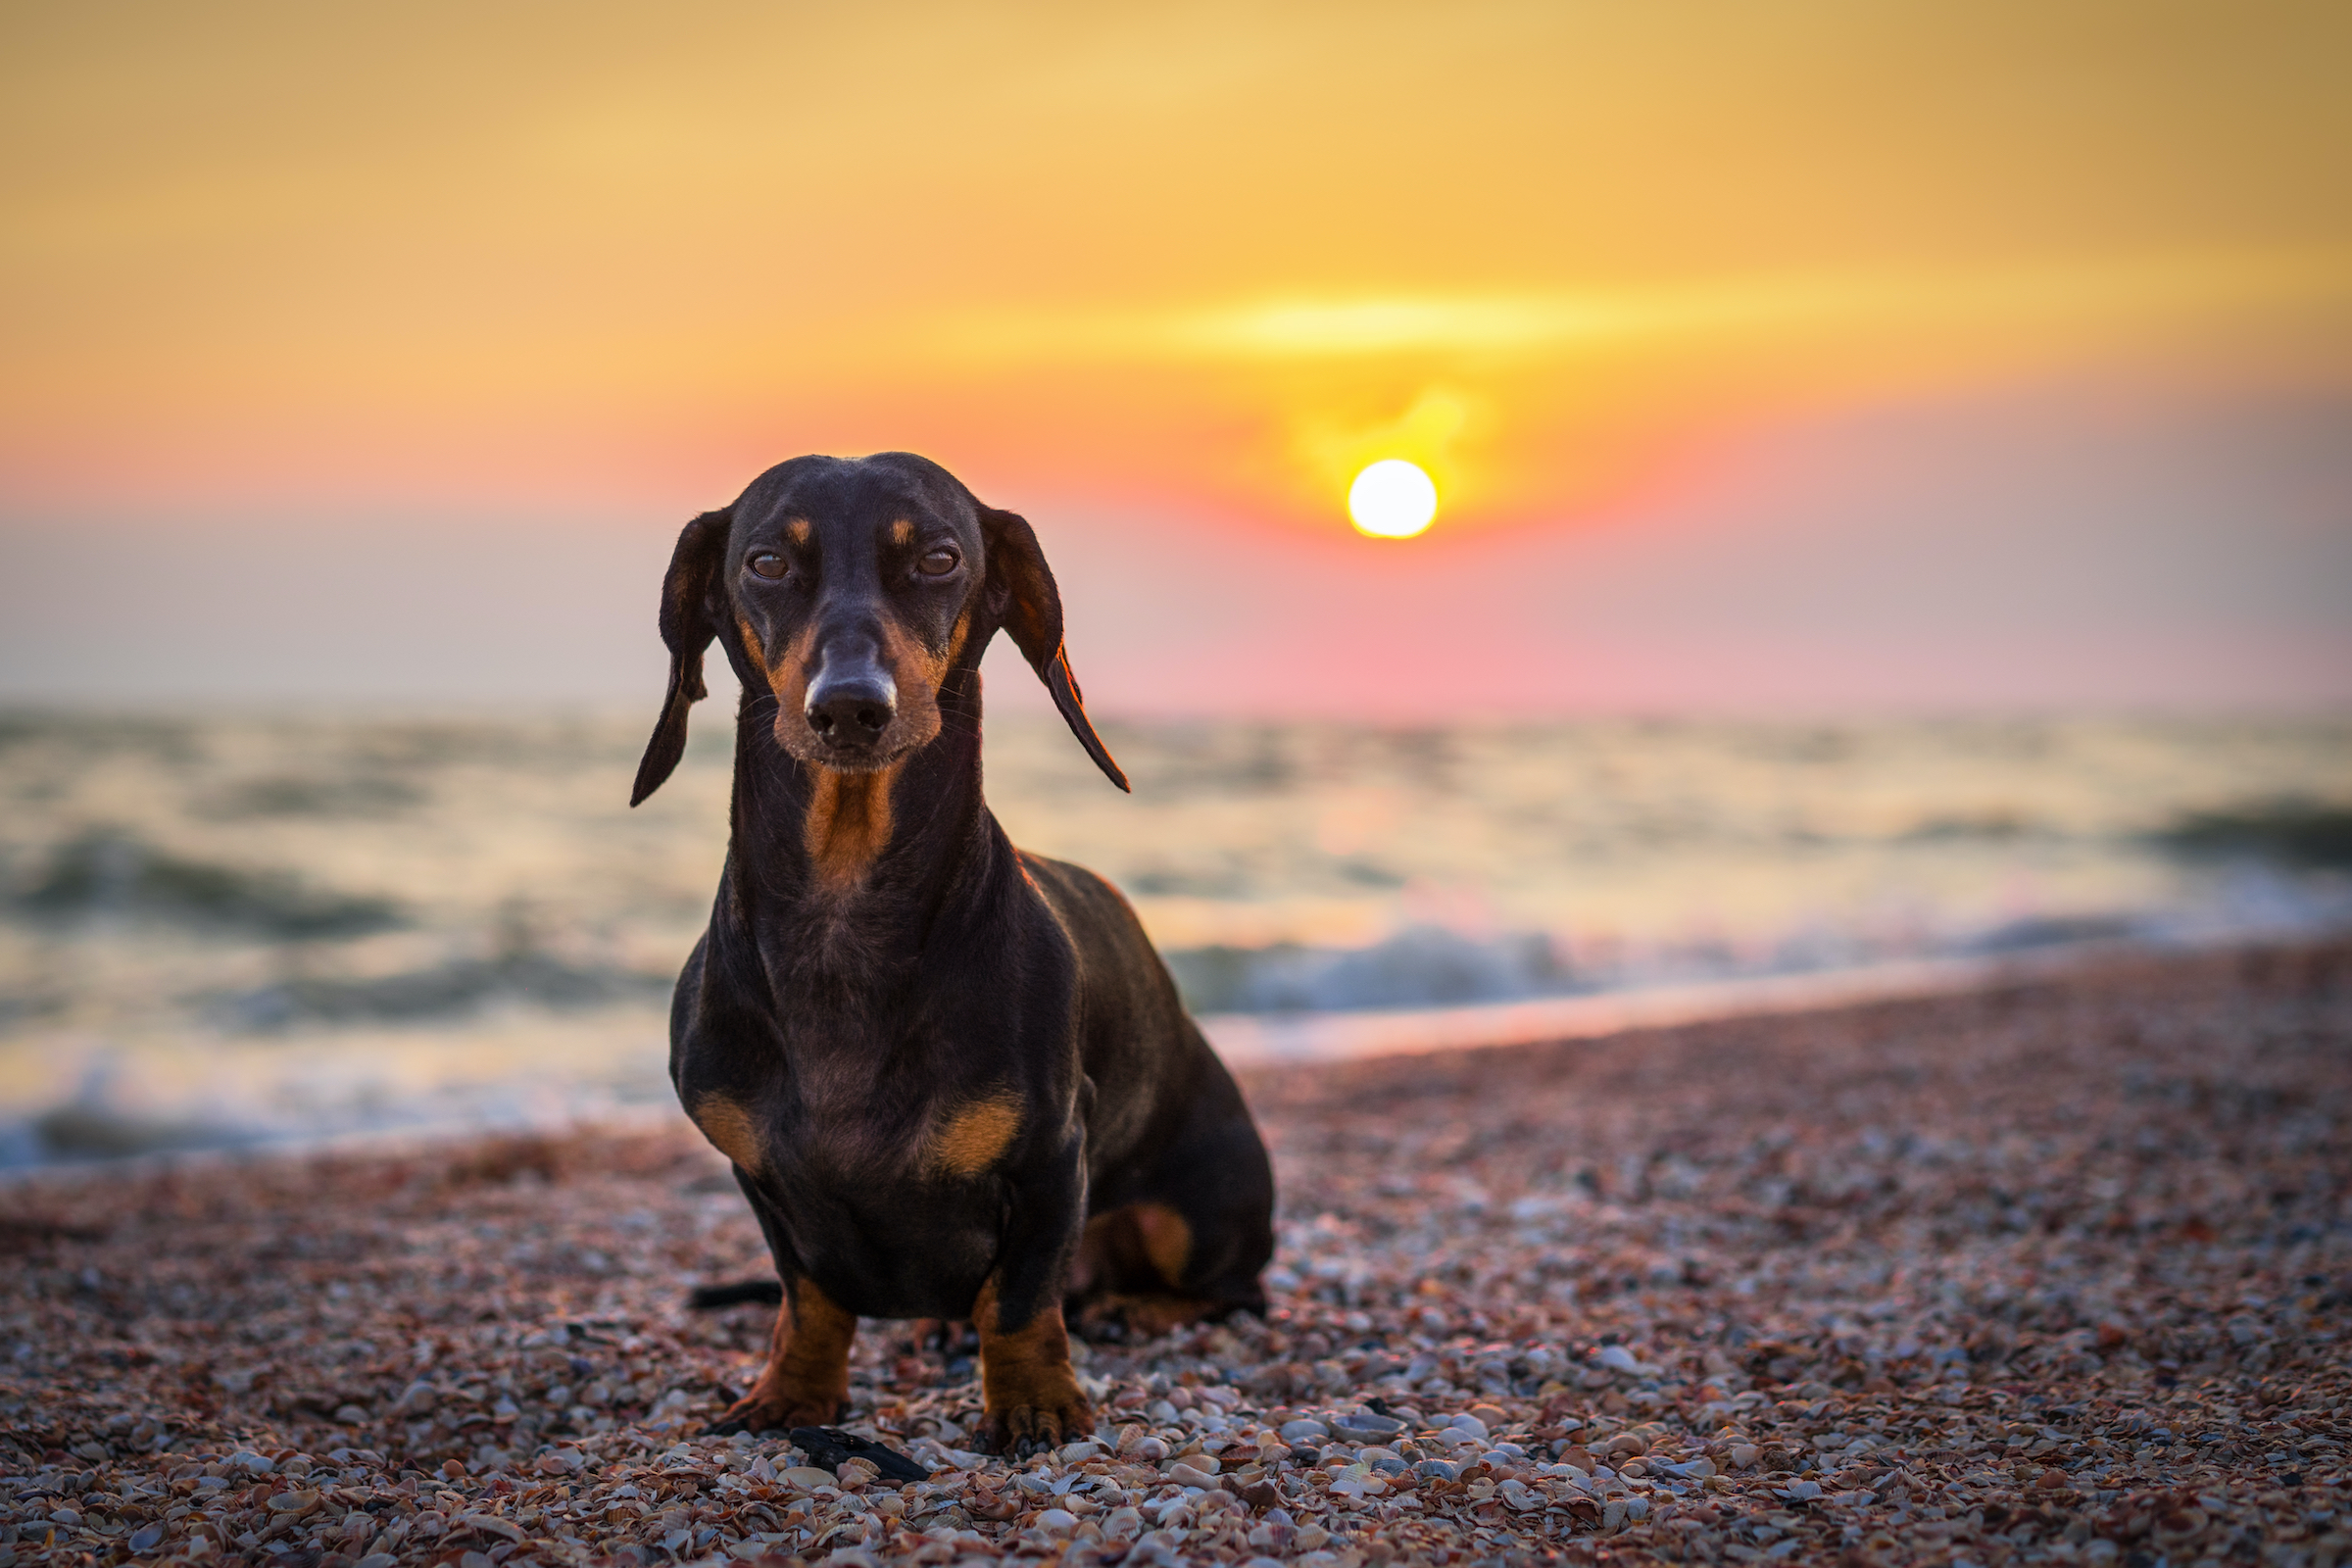 A dachshund sits on the beach in front of a sunset